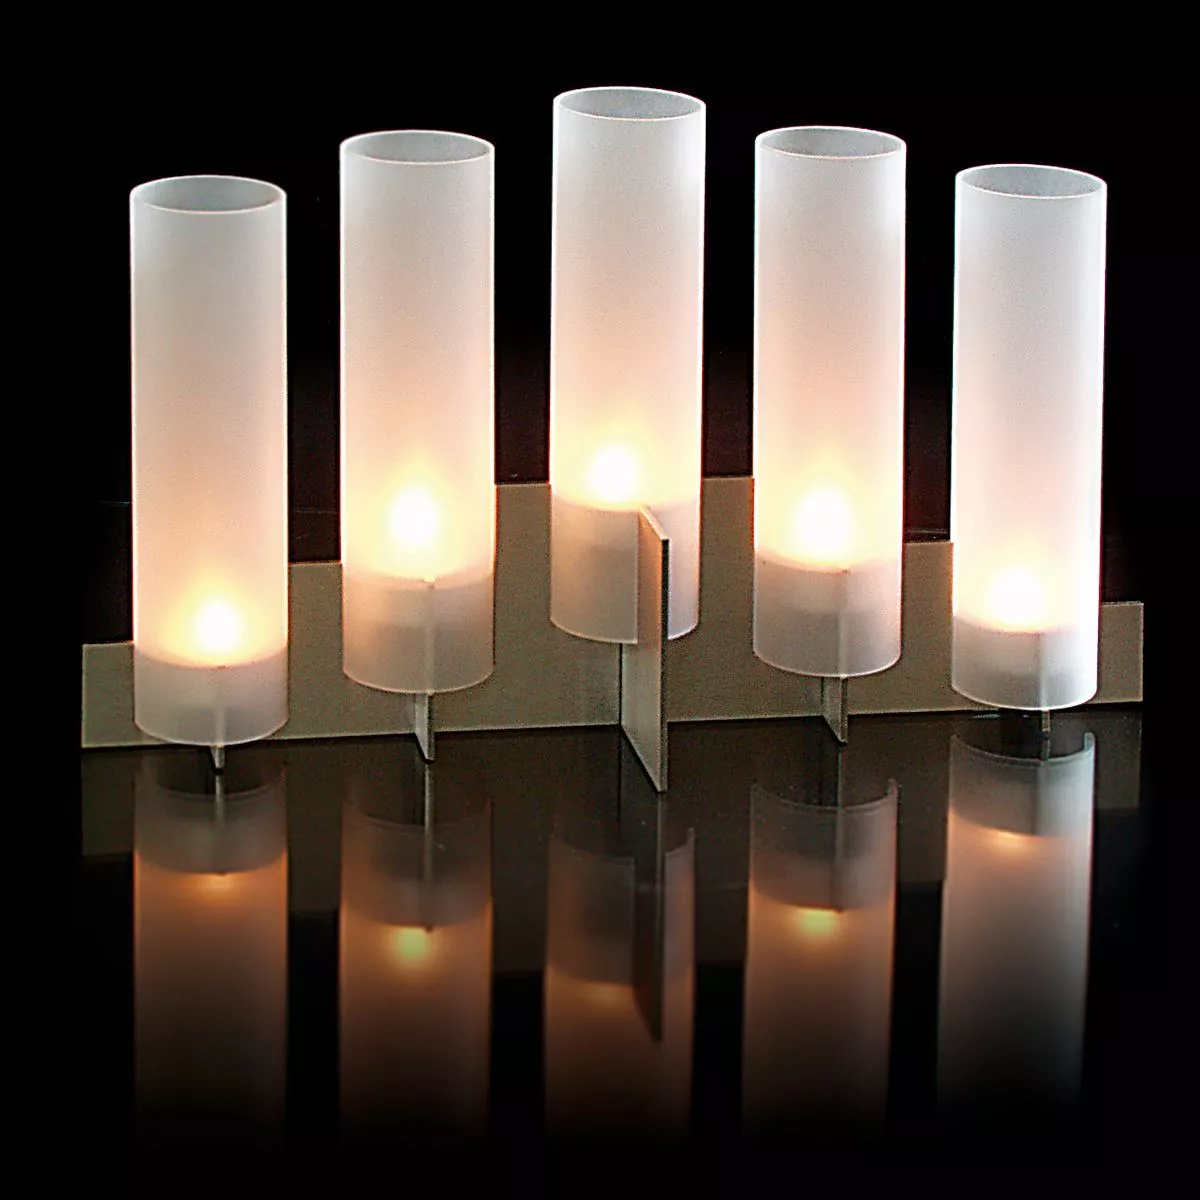 Design Table Lamp for Tealights